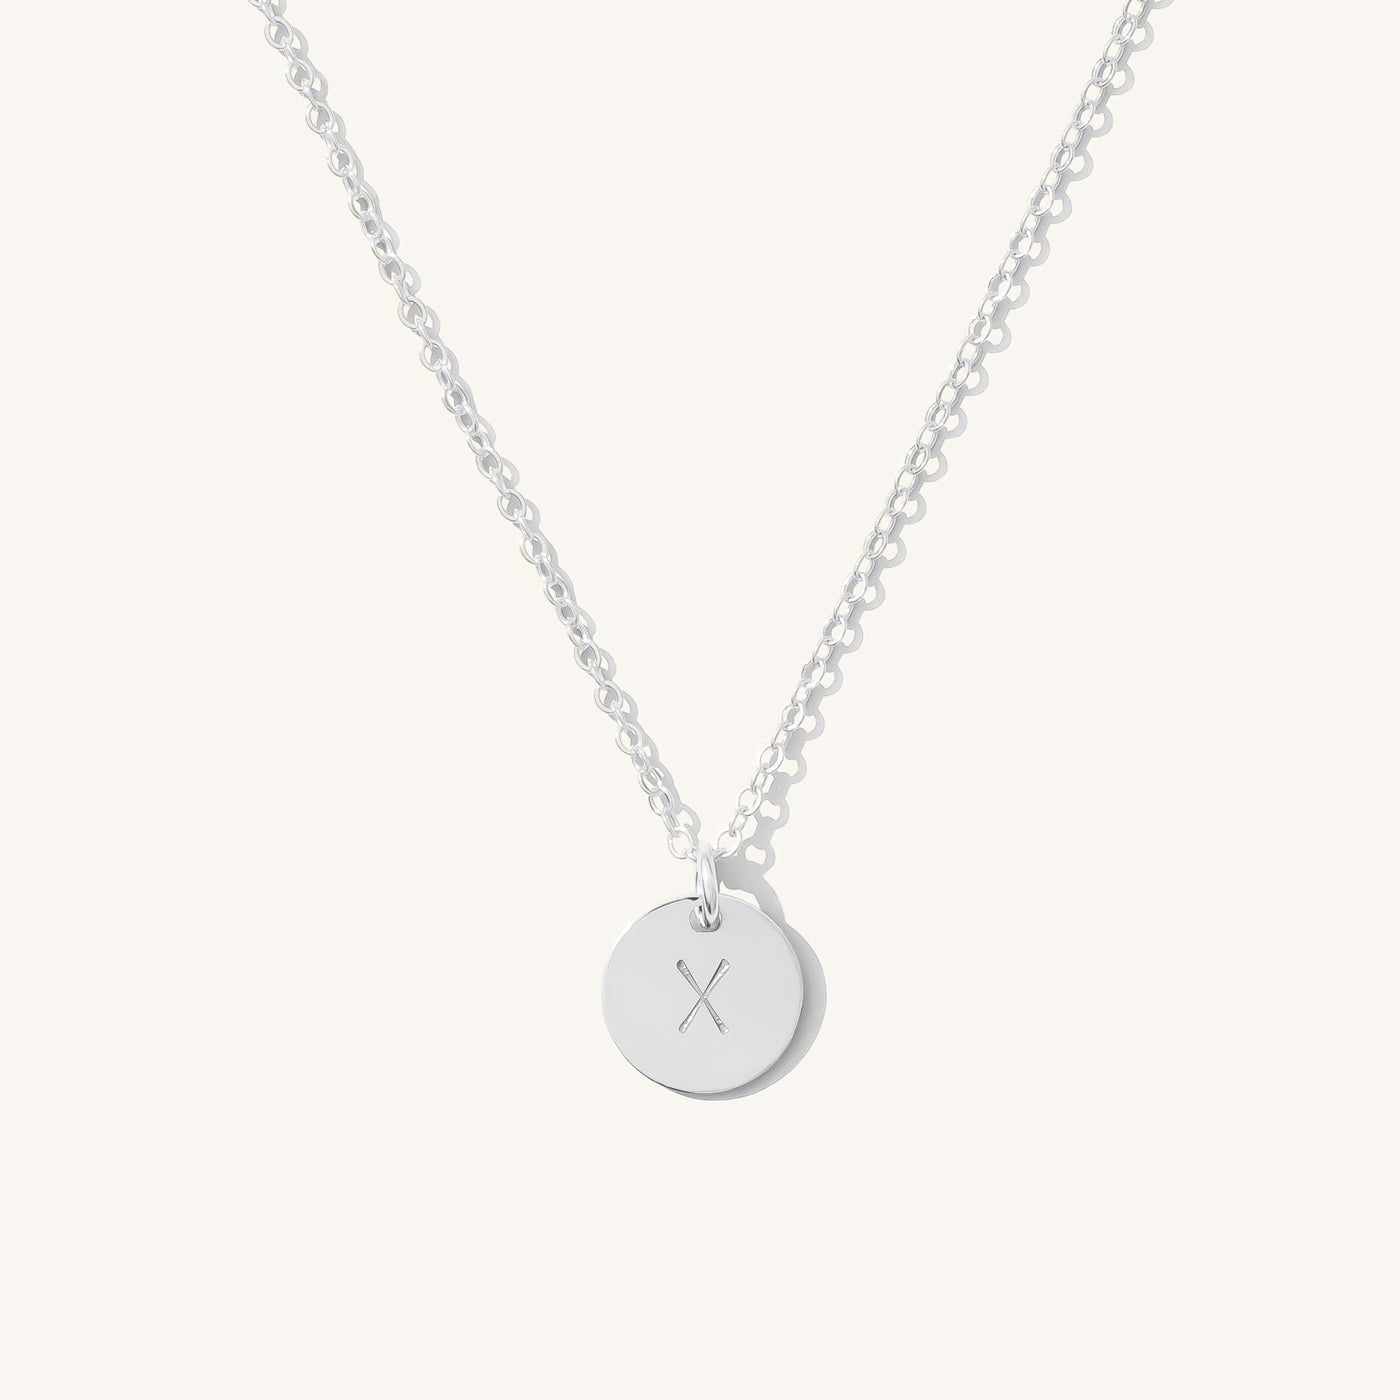 X Dainty Initial Necklace